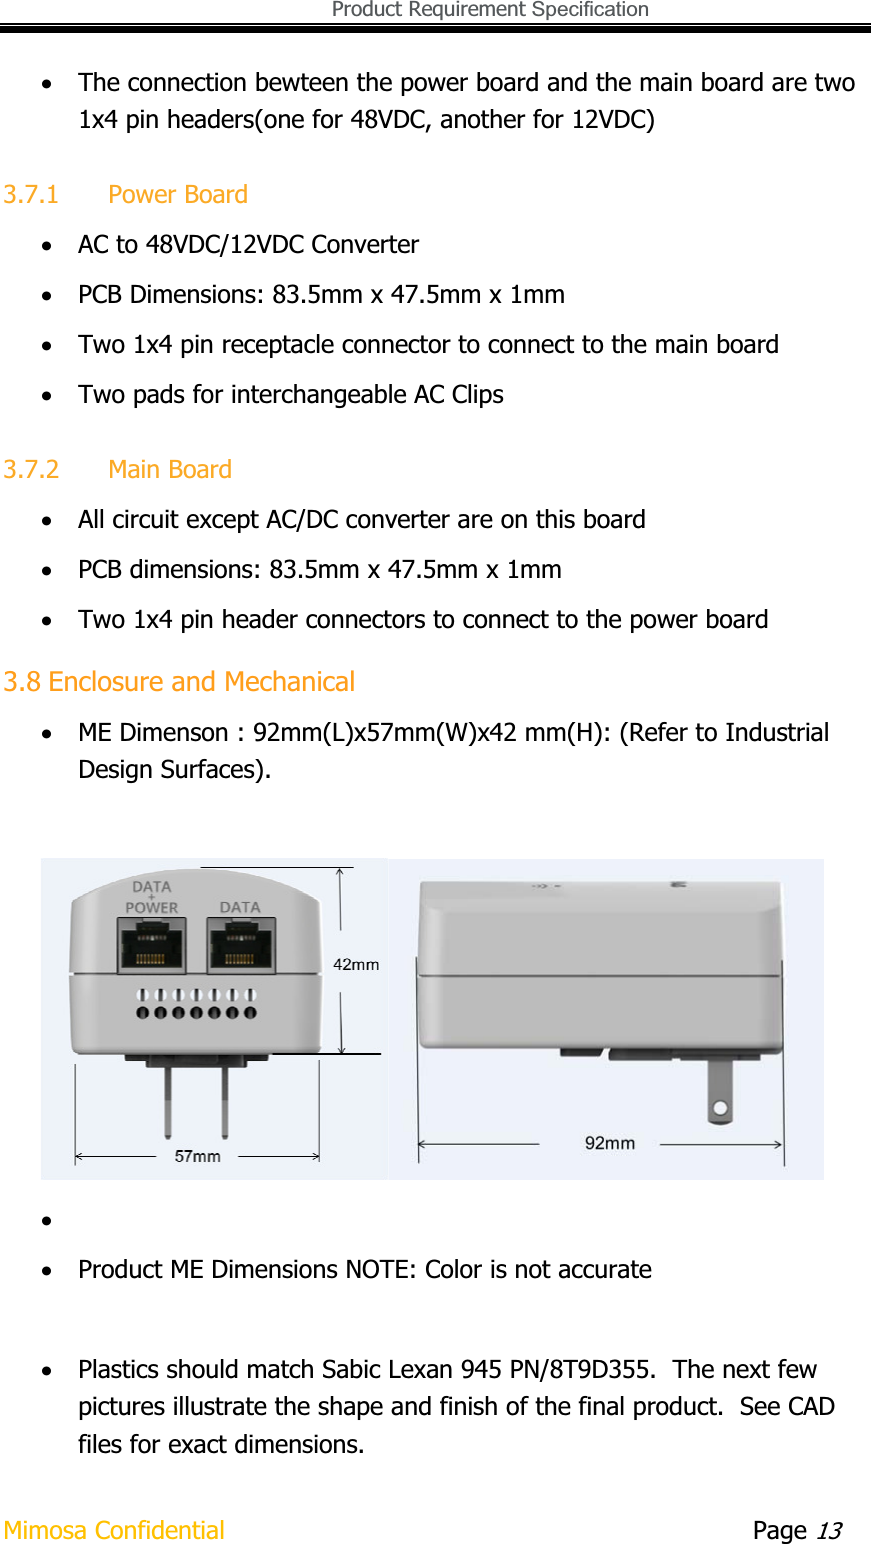   Product Requirement Specification Mimosa Confidential        Page 13xThe connection bewteen the power board and the main board are two 1x4 pin headers(one for 48VDC, another for 12VDC) 3.7.1 Power Board xAC to 48VDC/12VDC Converter xPCB Dimensions: 83.5mm x 47.5mm x 1mm xTwo 1x4 pin receptacle connector to connect to the main board xTwo pads for interchangeable AC Clips 3.7.2 Main Board xAll circuit except AC/DC converter are on this board xPCB dimensions: 83.5mm x 47.5mm x 1mm xTwo 1x4 pin header connectors to connect to the power board 3.8 Enclosure and Mechanical xME Dimenson : 92mm(L)x57mm(W)x42 mm(H): (Refer to Industrial Design Surfaces). xxProduct ME Dimensions NOTE: Color is not accurate xPlastics should match Sabic Lexan 945 PN/8T9D355.  The next few pictures illustrate the shape and finish of the final product.  See CAD files for exact dimensions. 